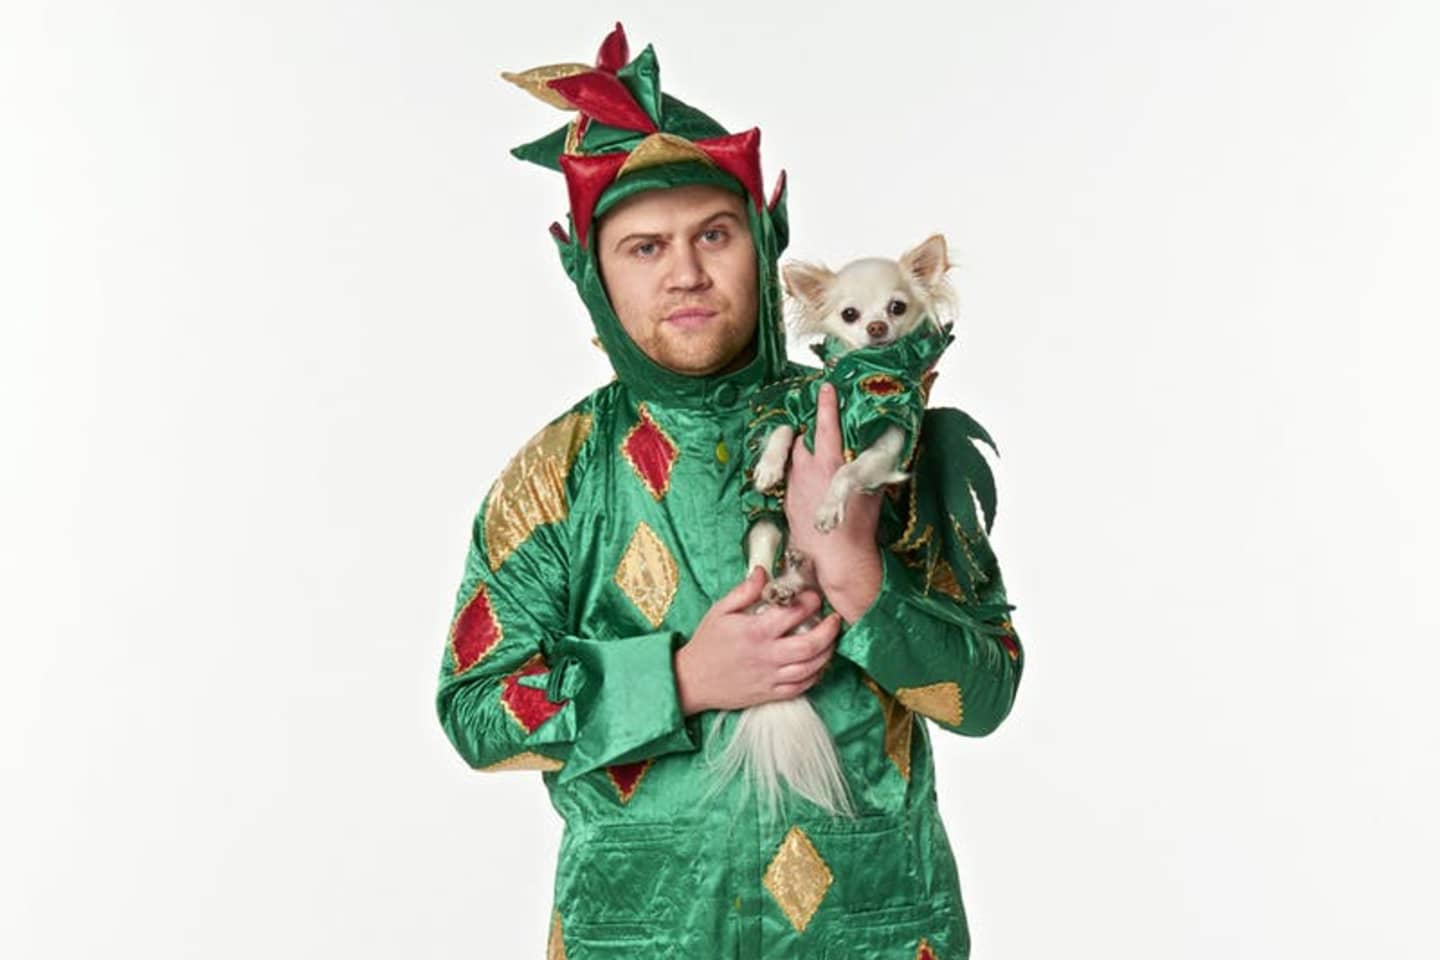 Piff the Magic Dragon Tour Tickets Buy or Sell Tickets for Piff the Magic Dragon Tour Tour